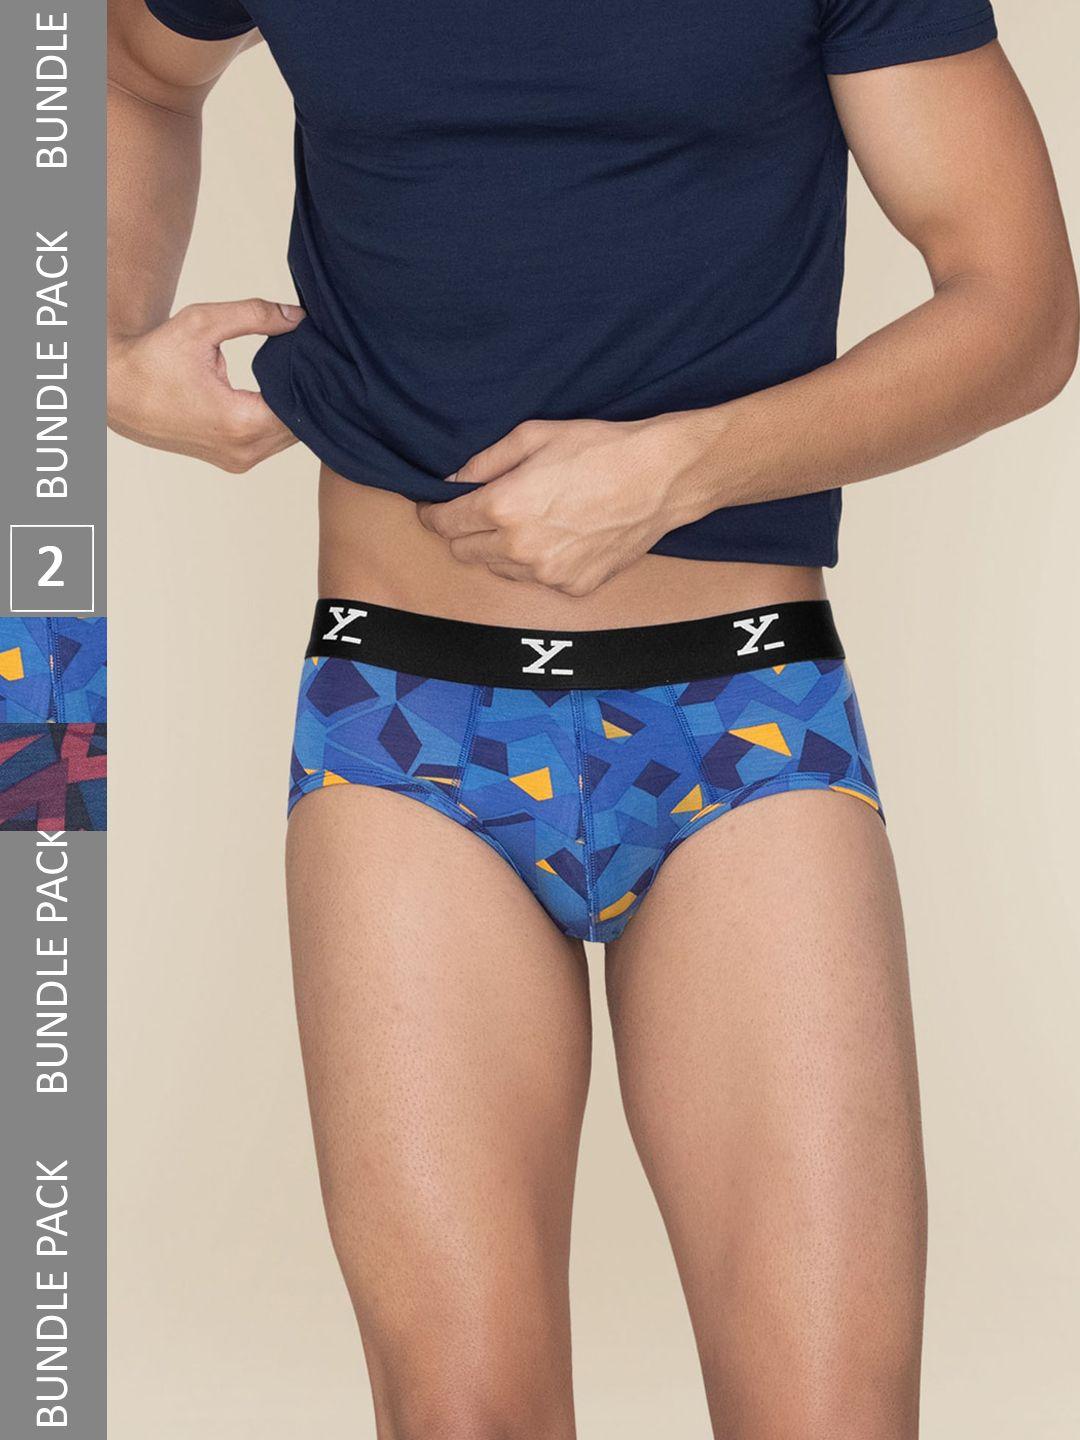 xyxx men pack of 2 printed basic briefs xybrf2pckn712